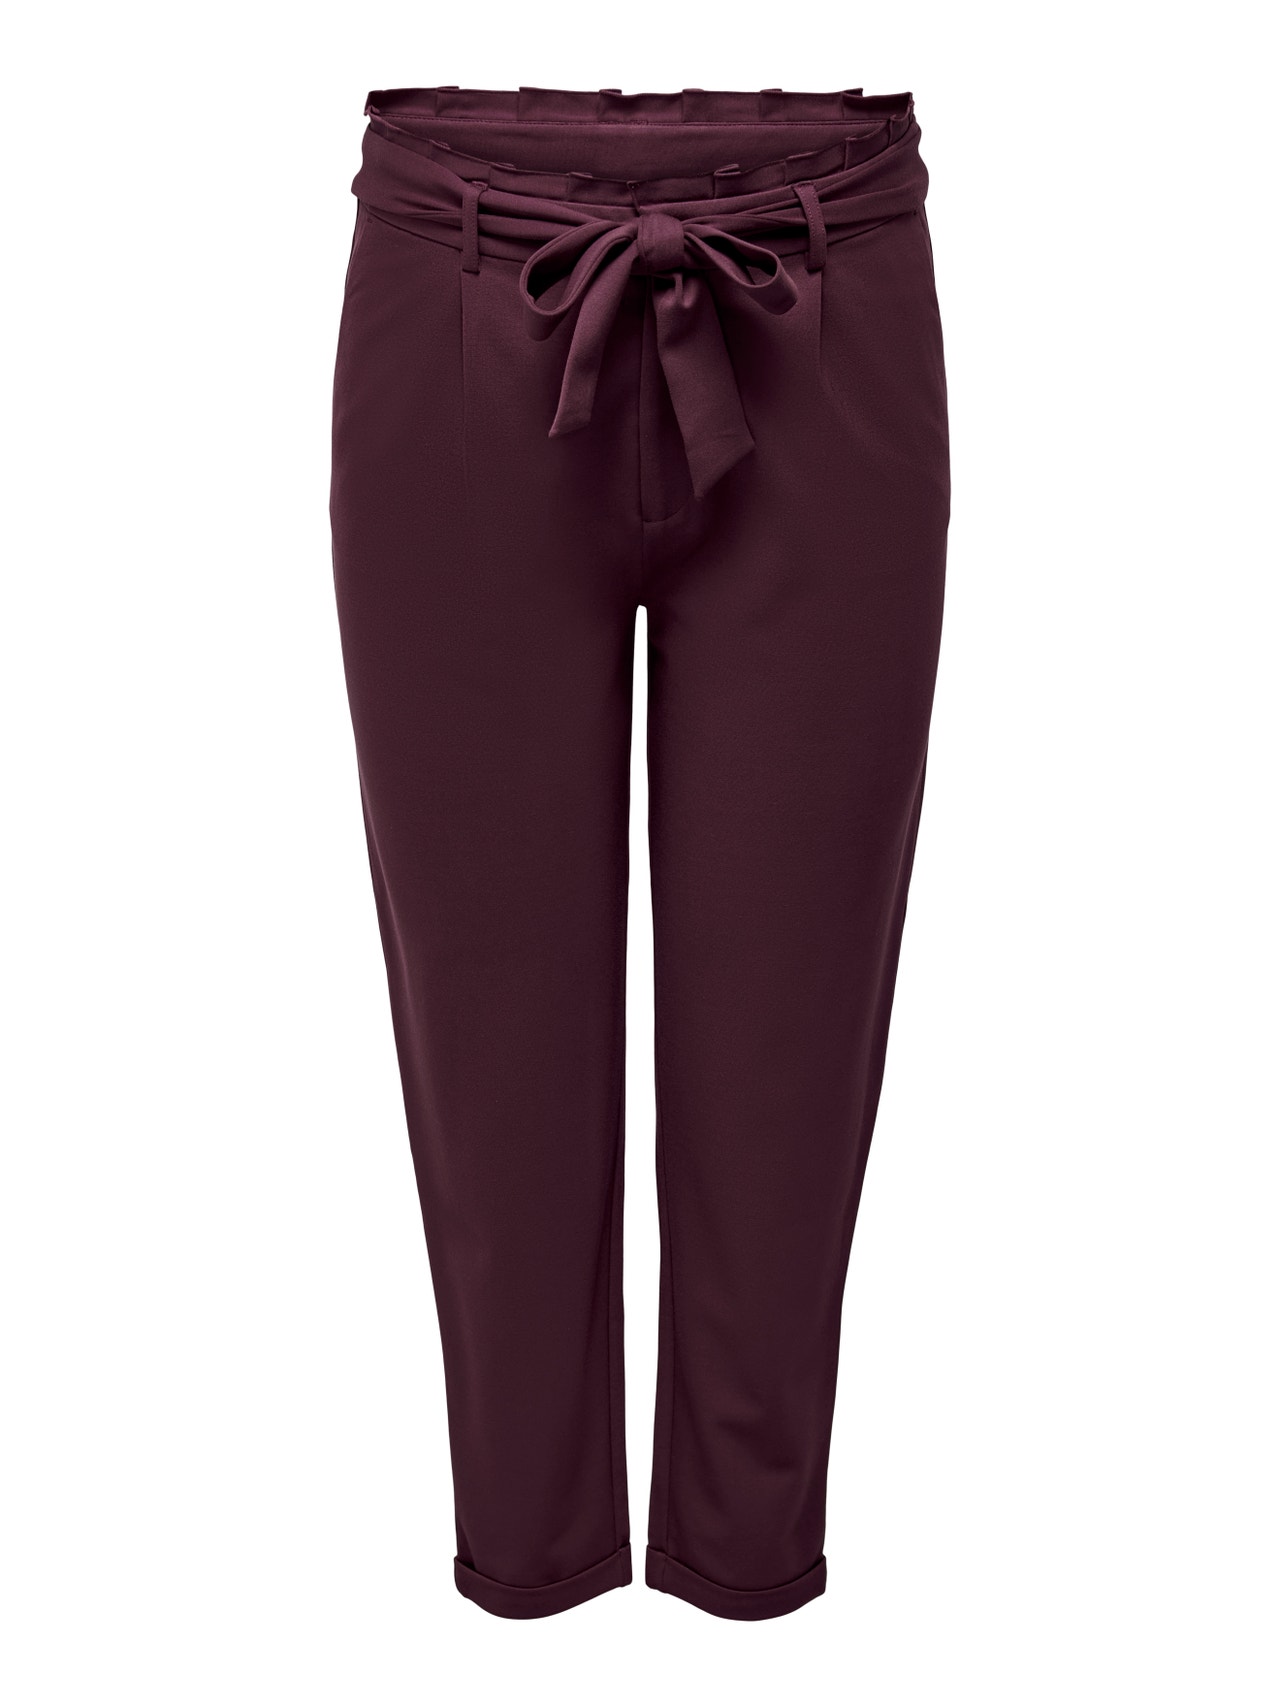 ONLY Normal geschnitten Sehr niedrige Taille Hose -Port Royale - 15293377